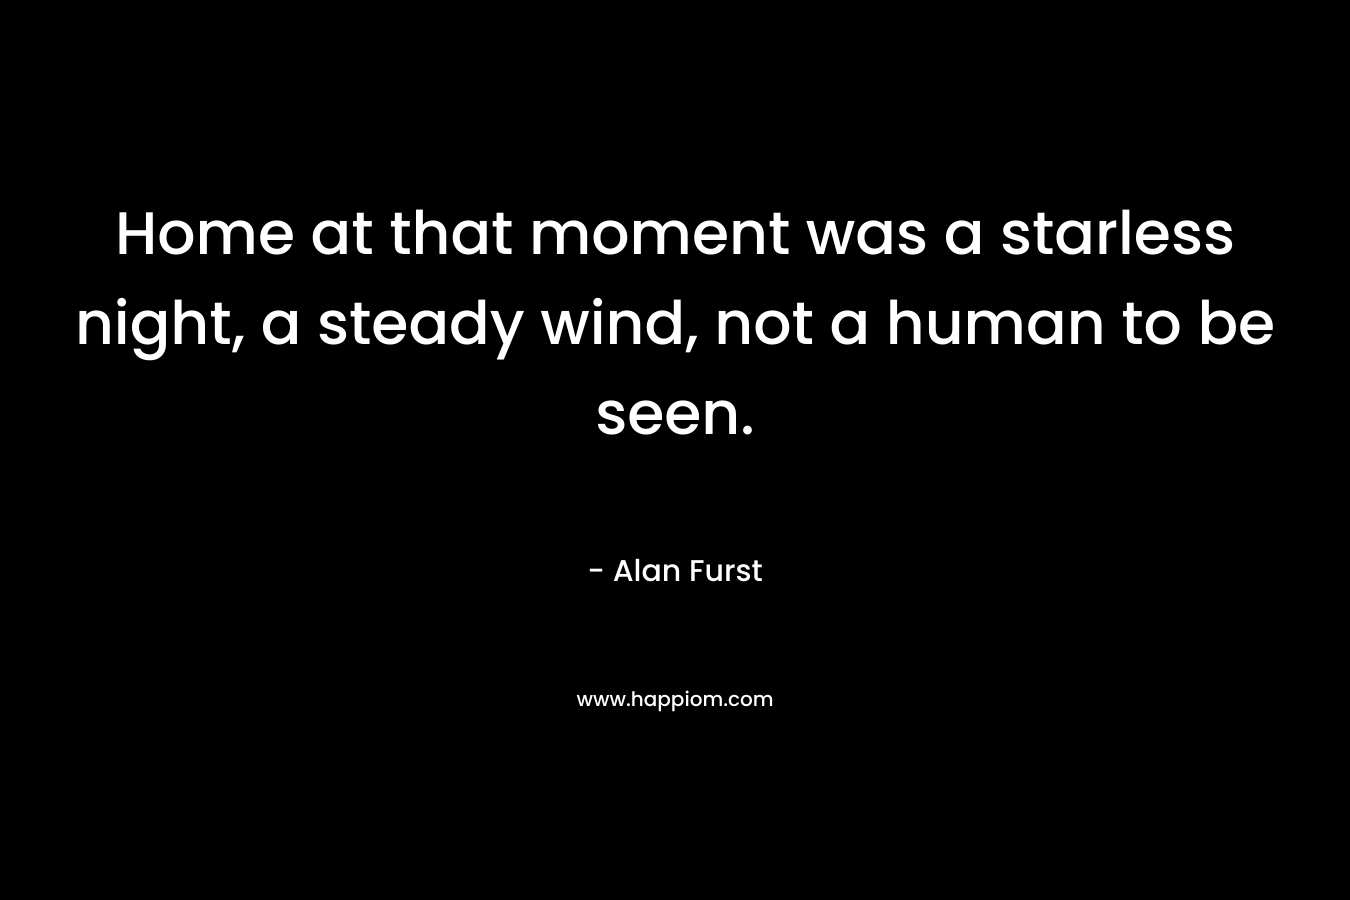 Home at that moment was a starless night, a steady wind, not a human to be seen. – Alan Furst